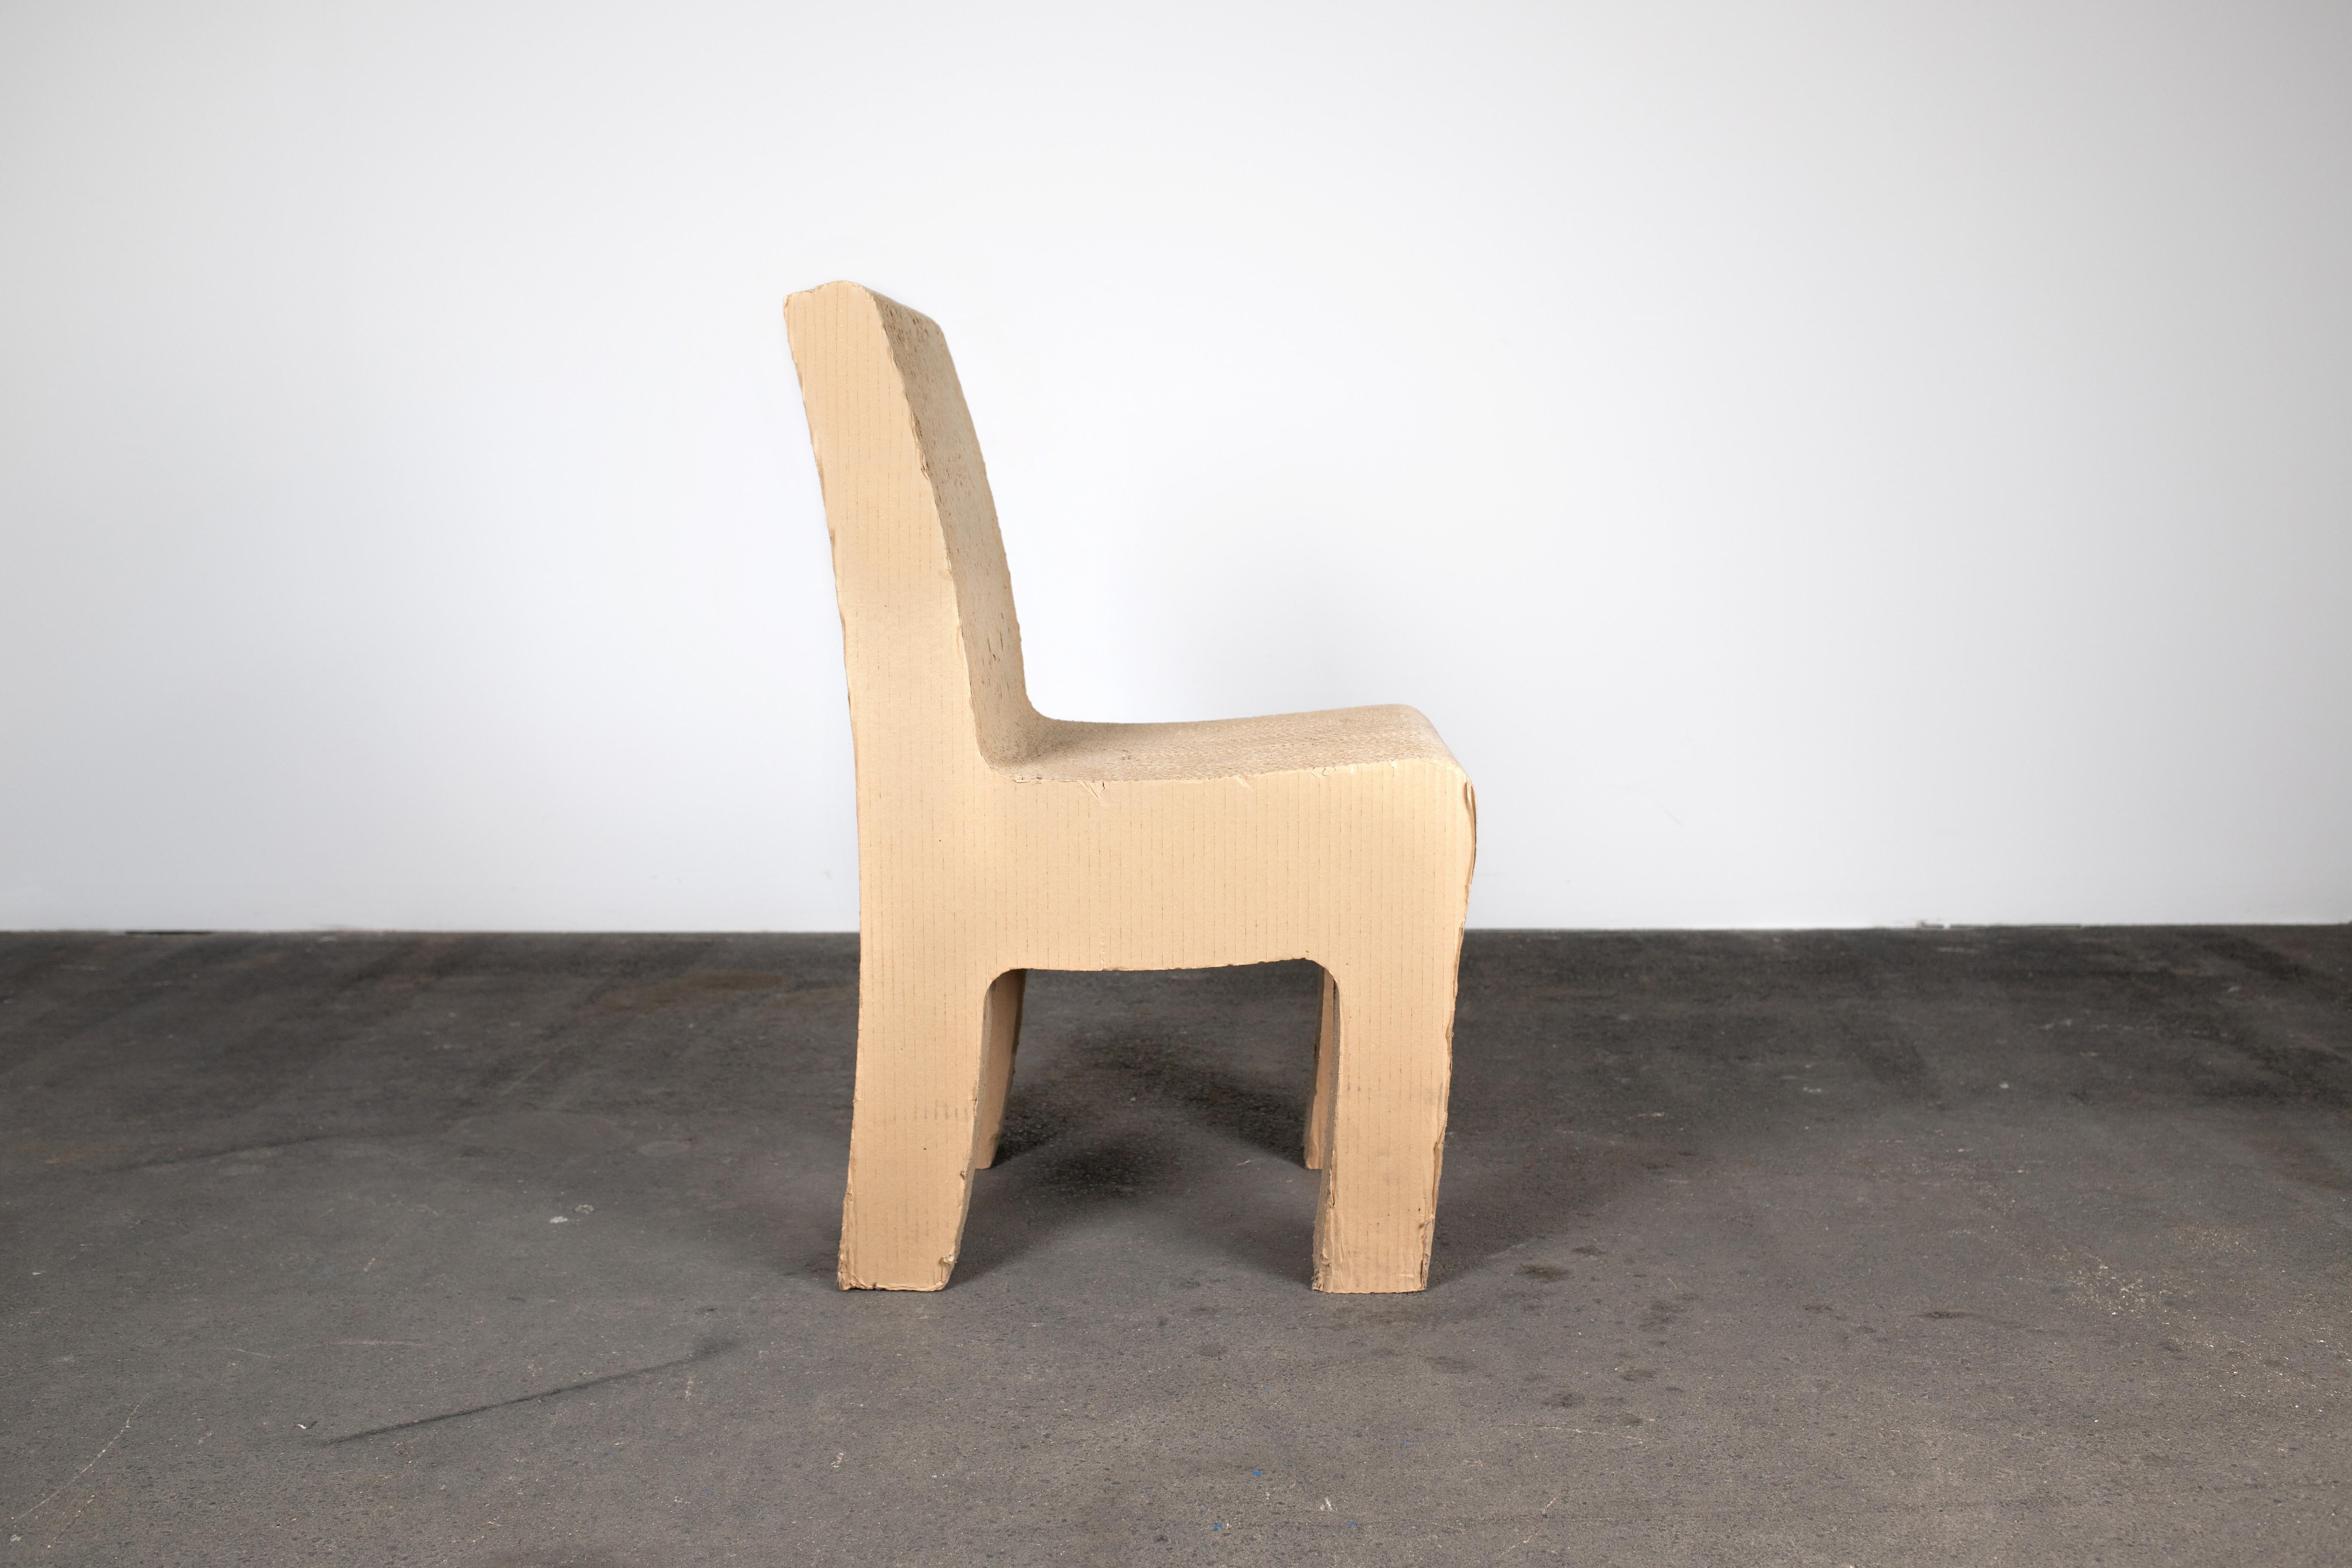 Postmodern whimsical cardboard sculptural chair from Germany 1980s in brown cardboard and reminiscent of Frank Gehry. The chair is surprisingly ergonomic and comfortable. It certainly adds playful flair and amusement to your space.

Condition is